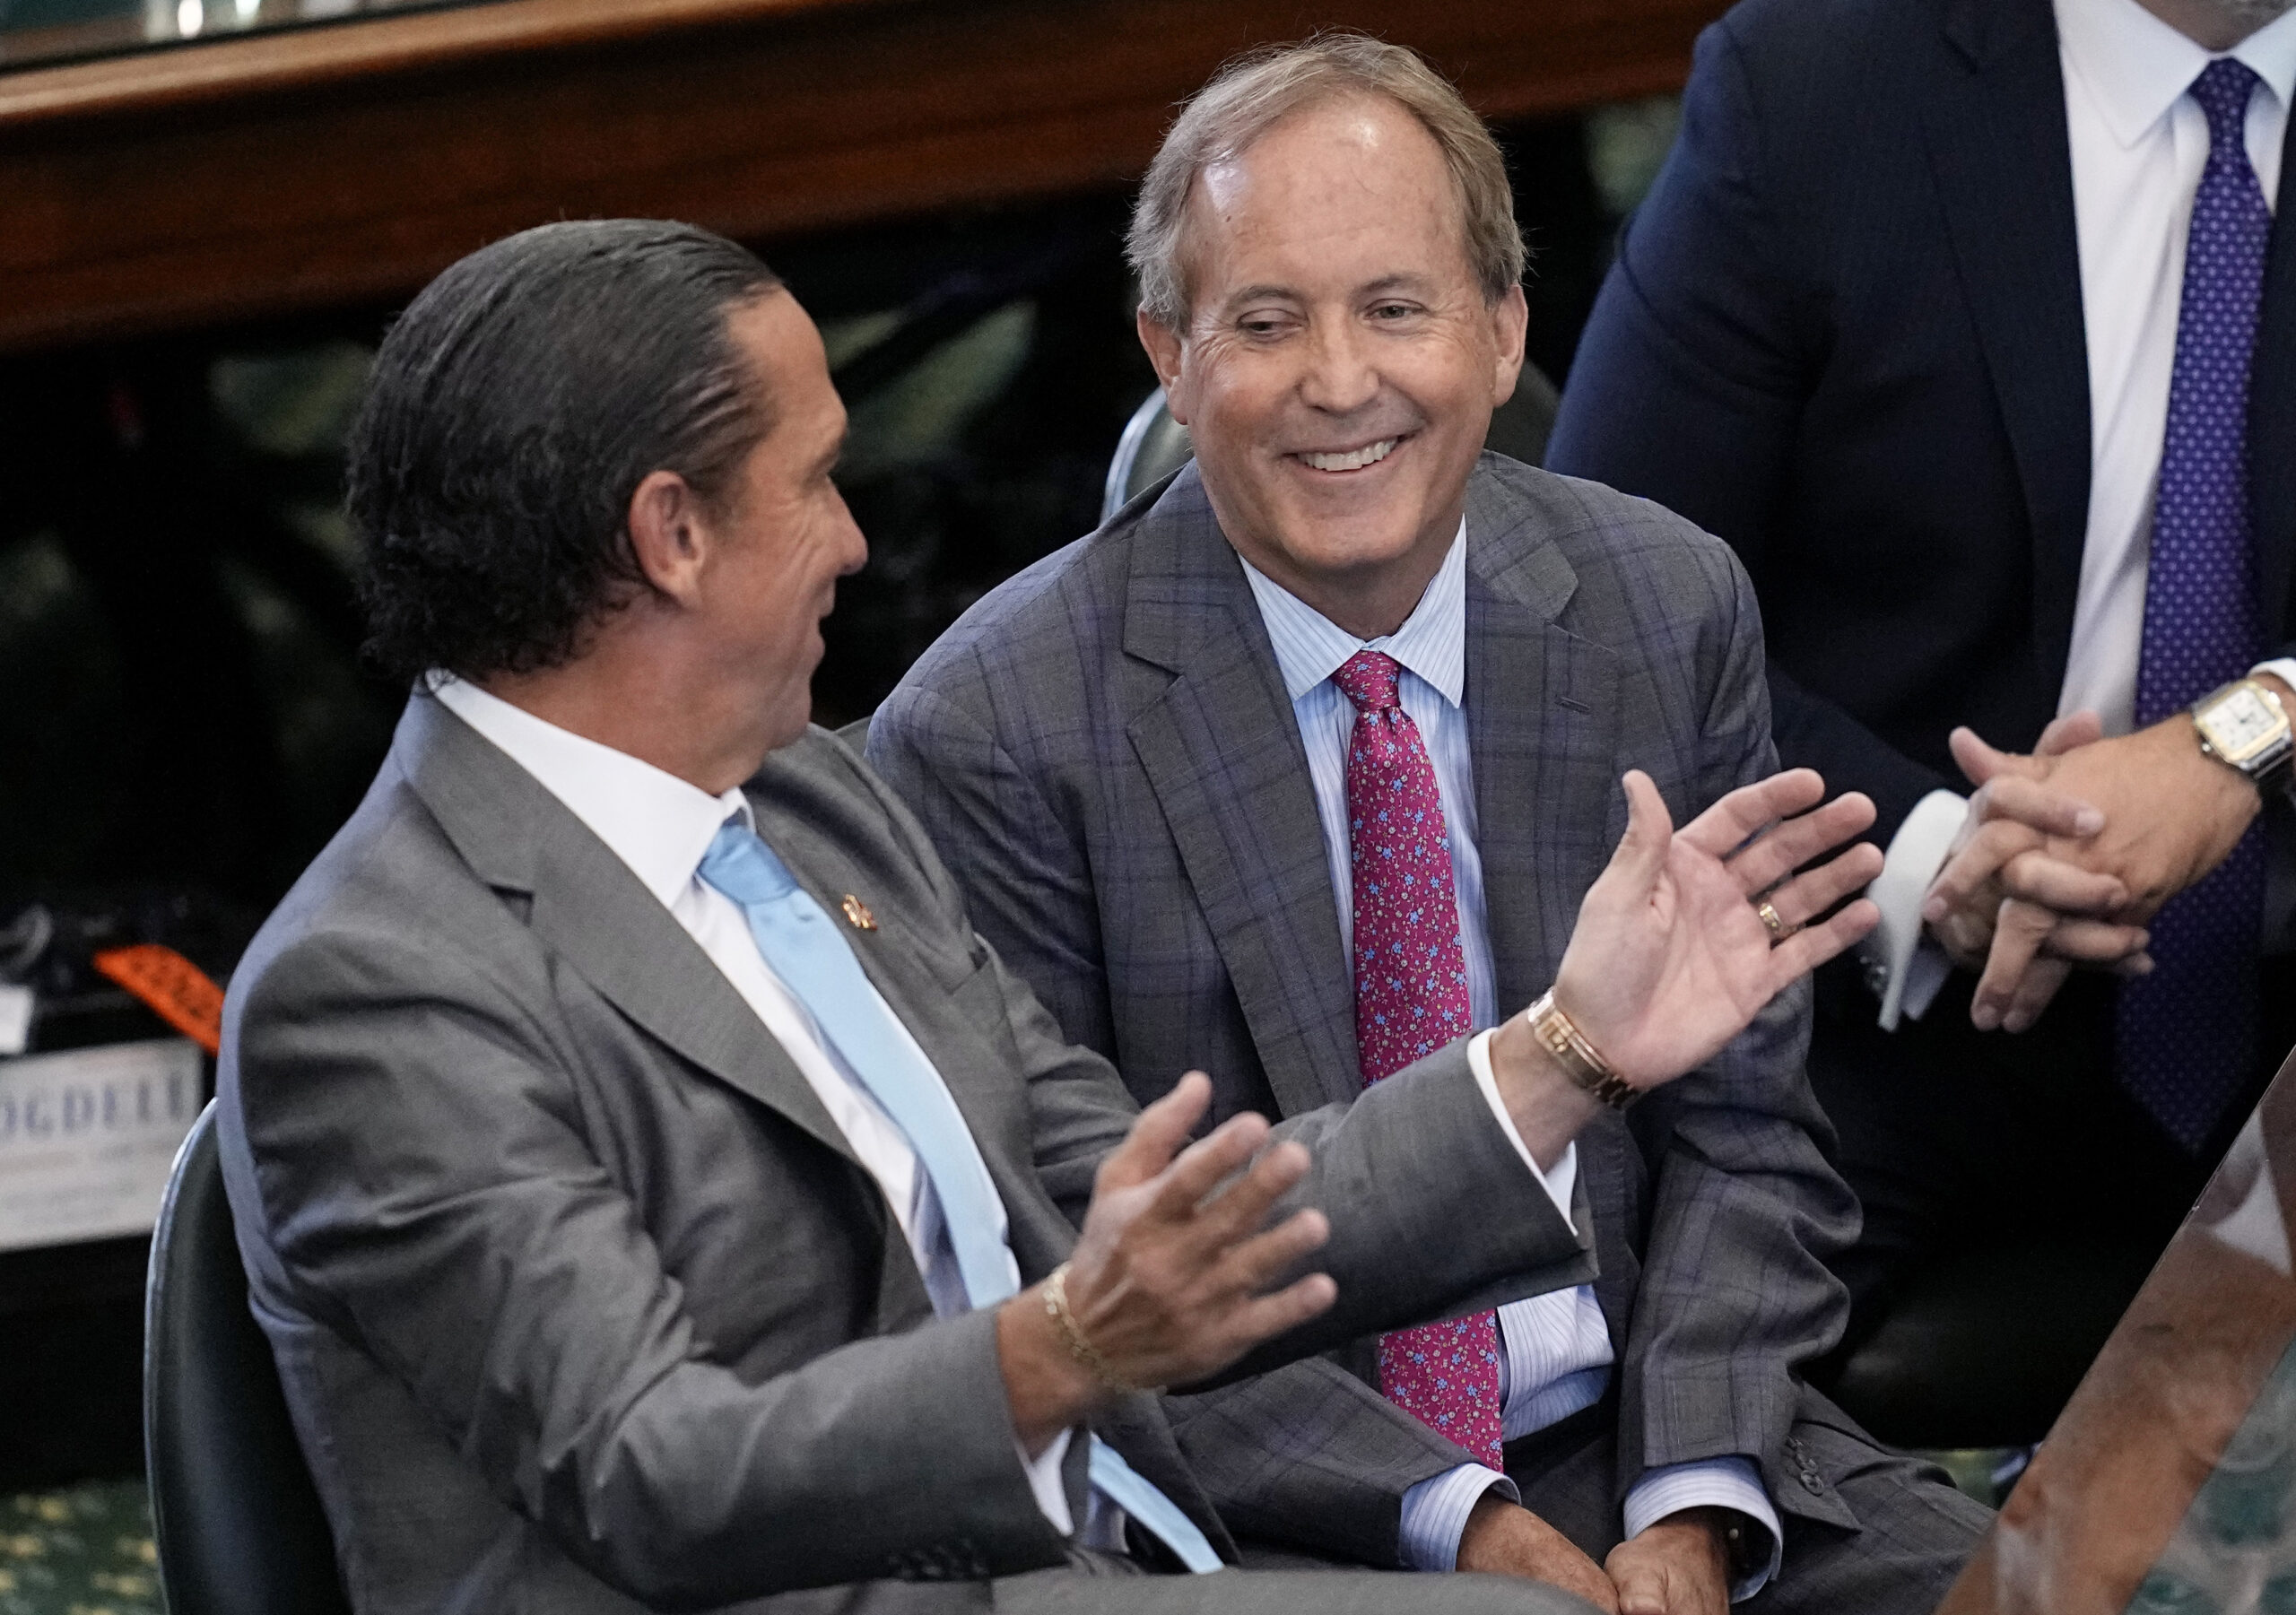 Ken Paxton and his lawyer are both wearing suits and ties, seated in the Senate chambers just before he was acquitted. Paxton's lawer, Tony Buzbee is gesturing with his hands while Paxton looks on with a grin.